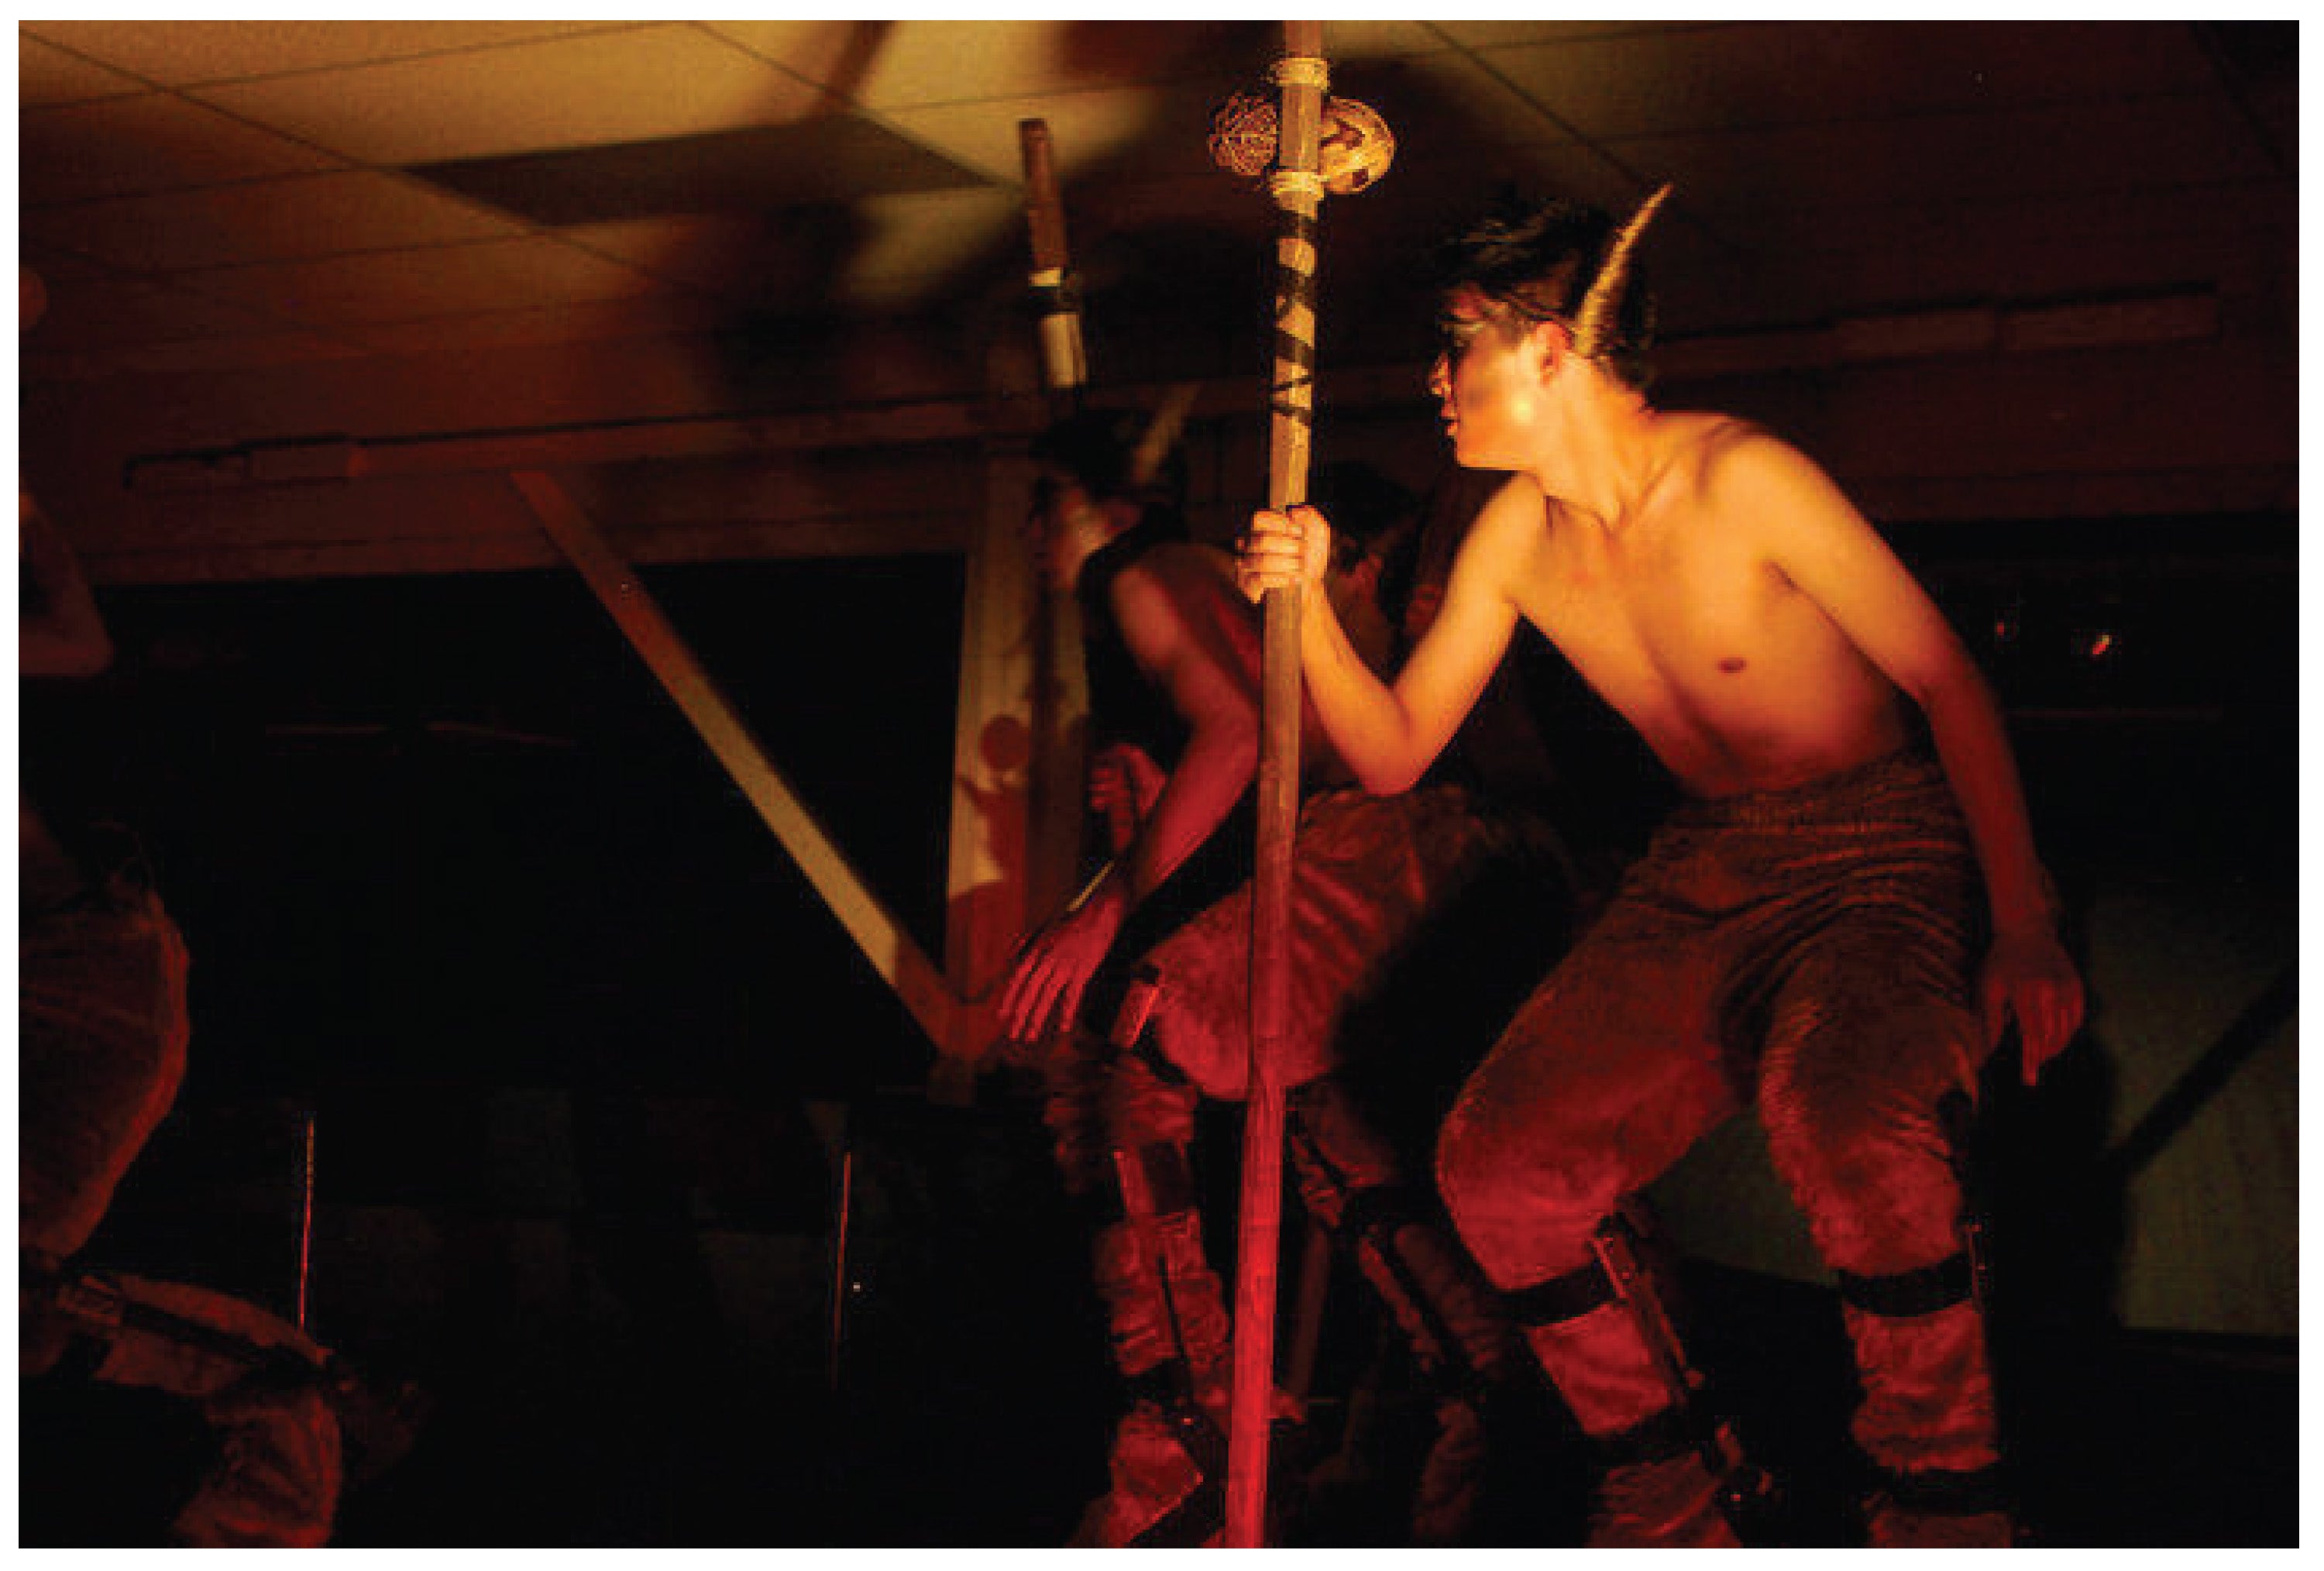 A photograph of savage looking people holding wooden staffs looking off to the side. The shot is made with limited lighting.